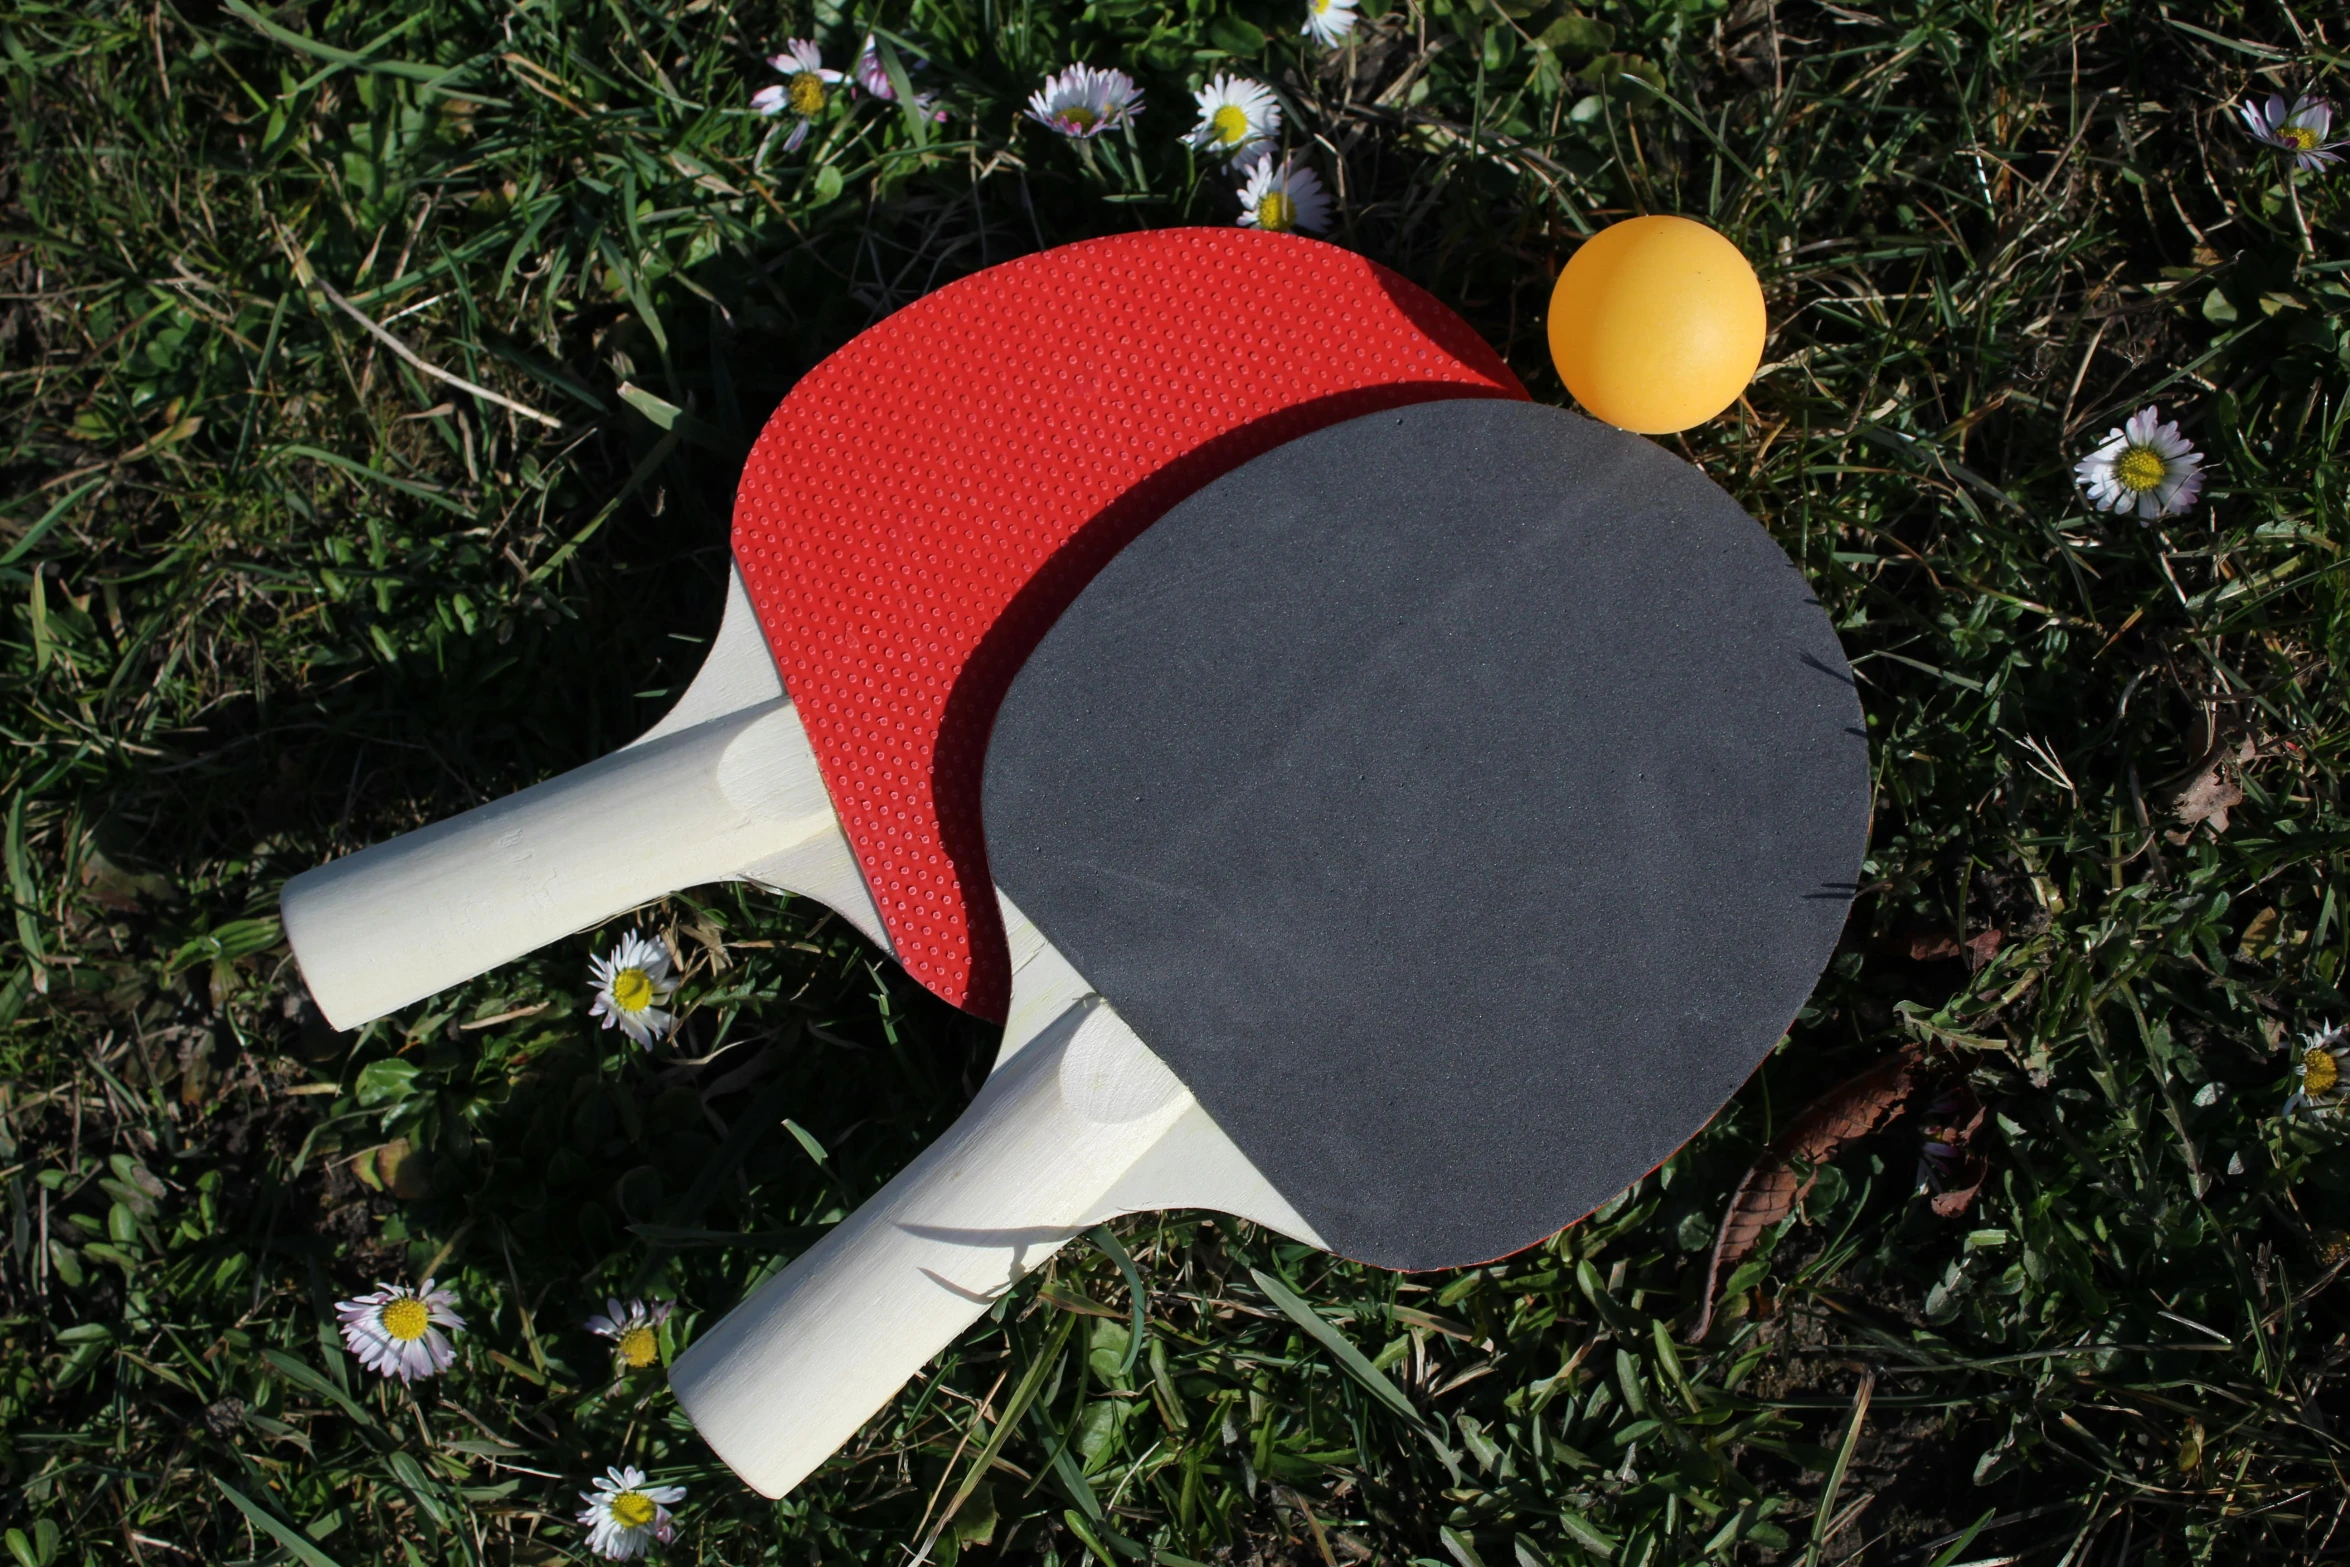 a ping pong paddle on the ground next to a ping pong ball